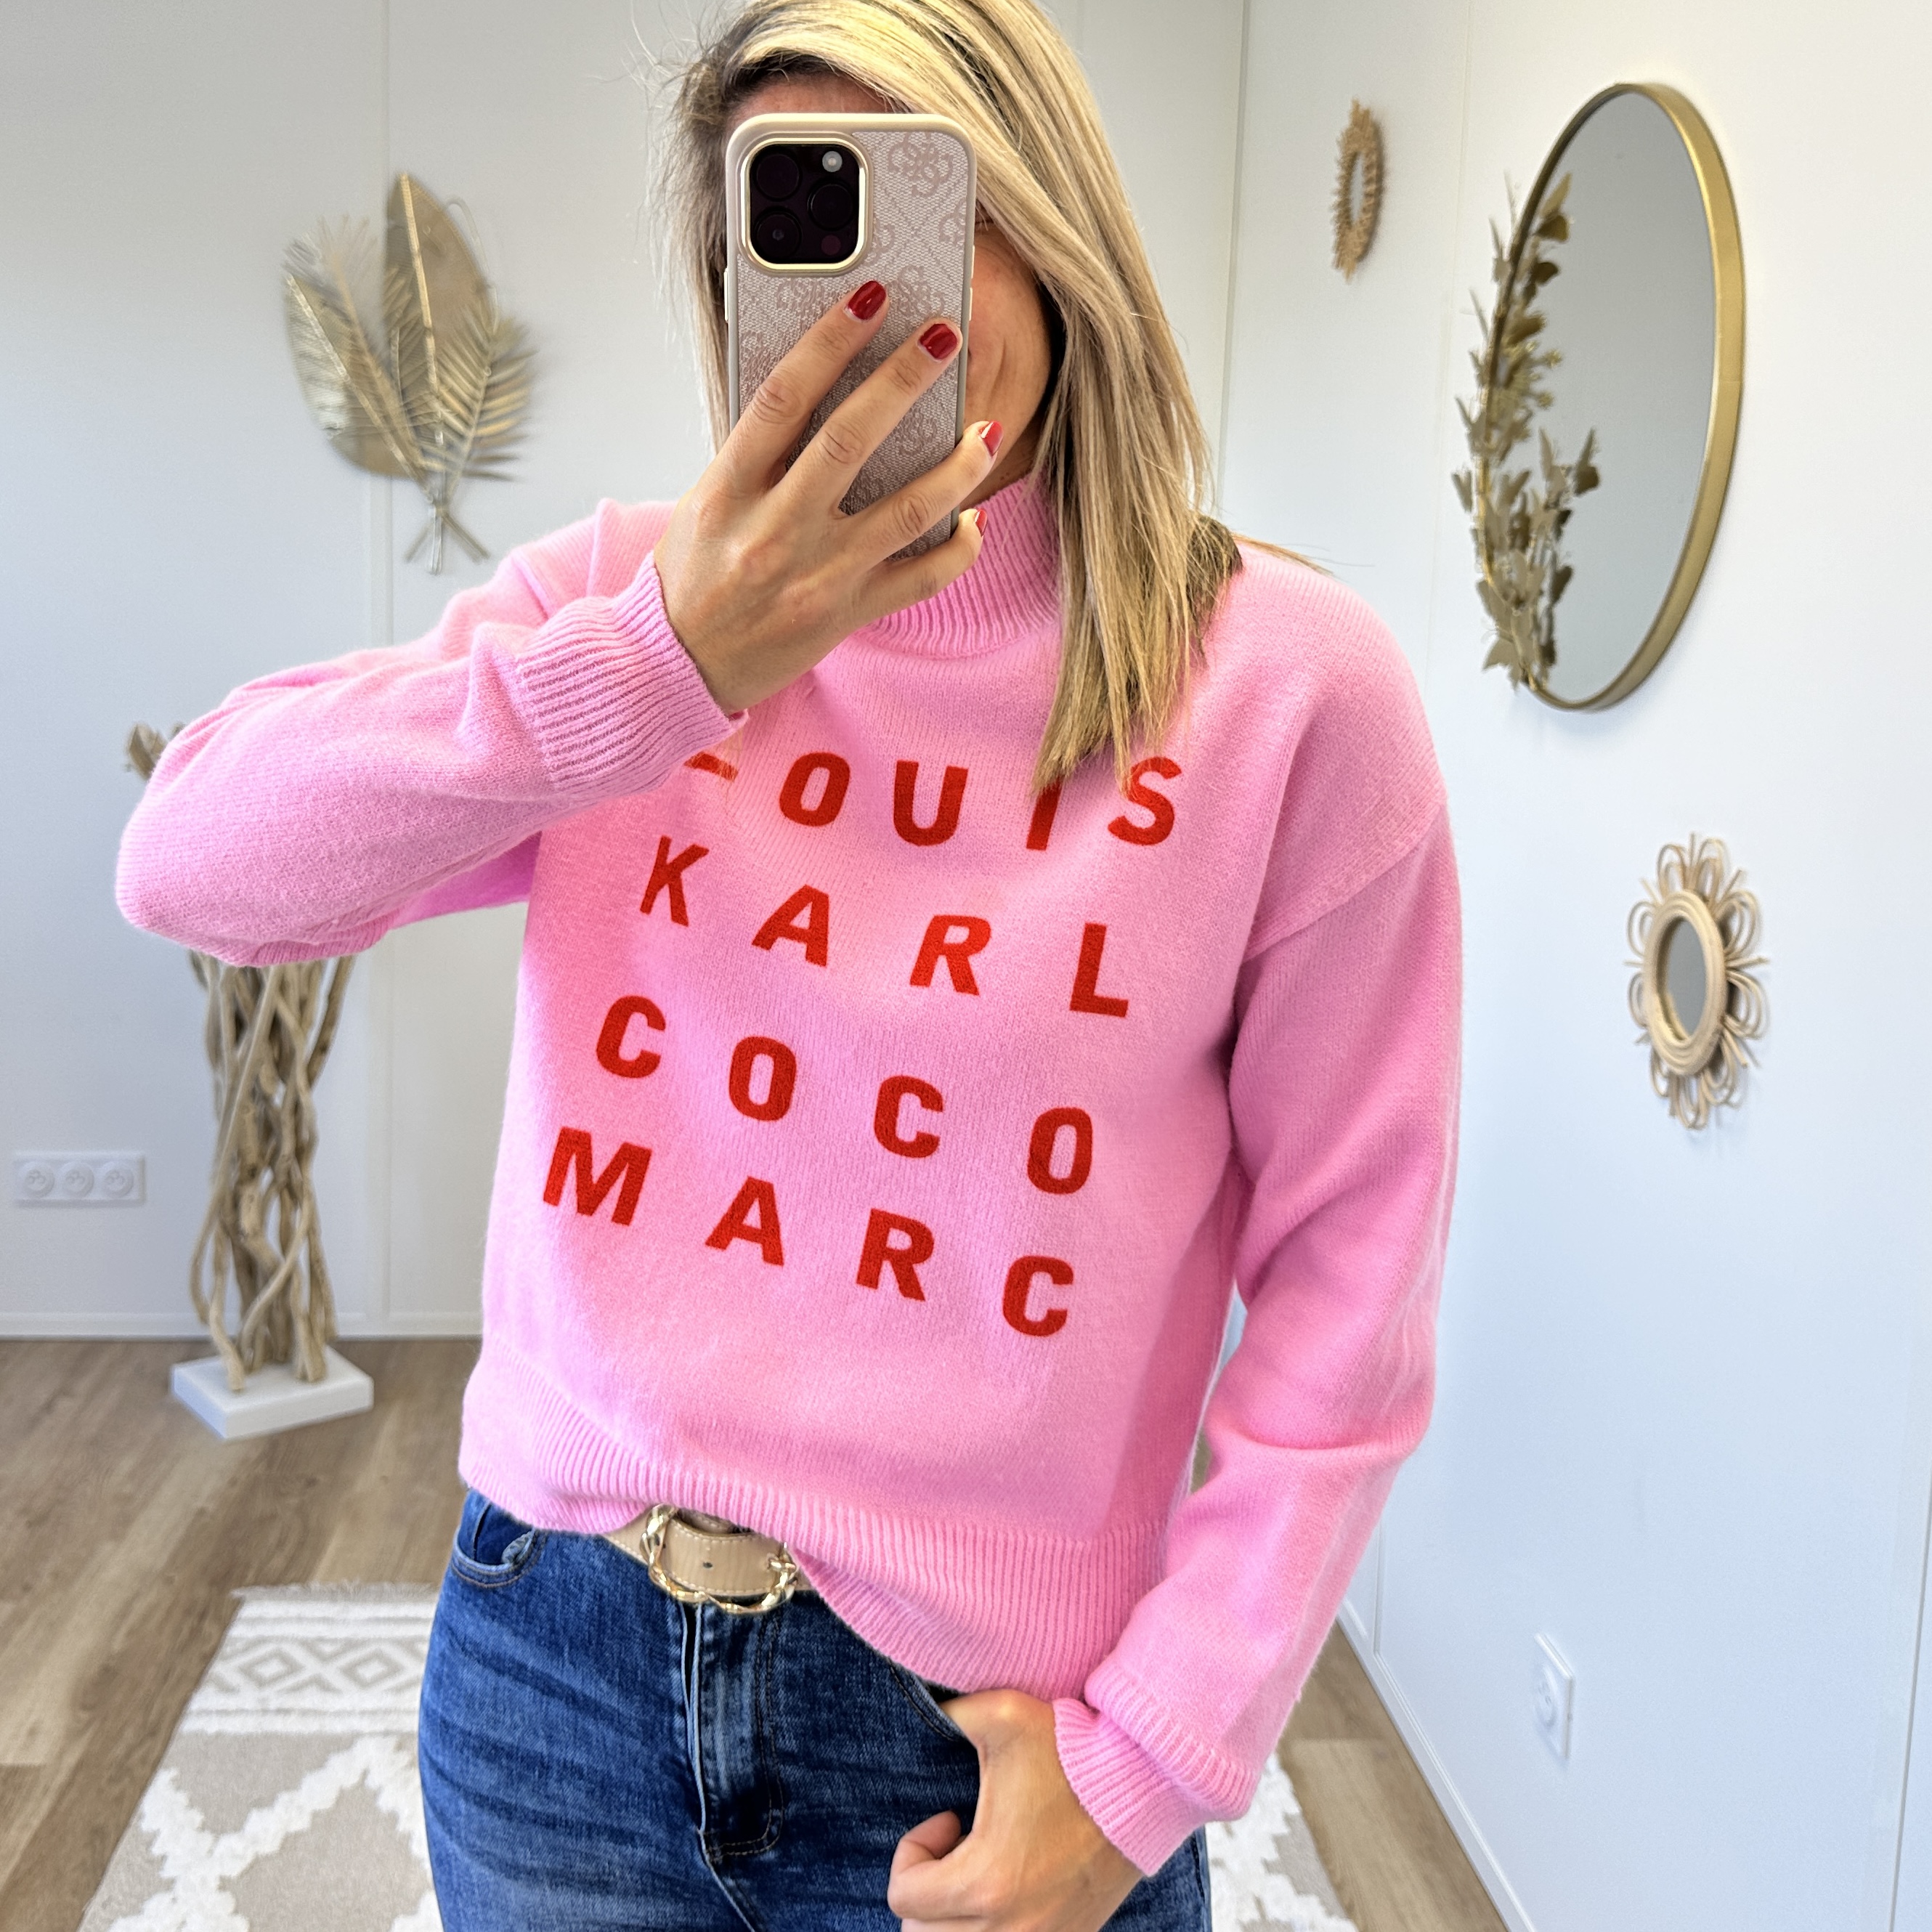 Pull Louis Karl coco MARC rose